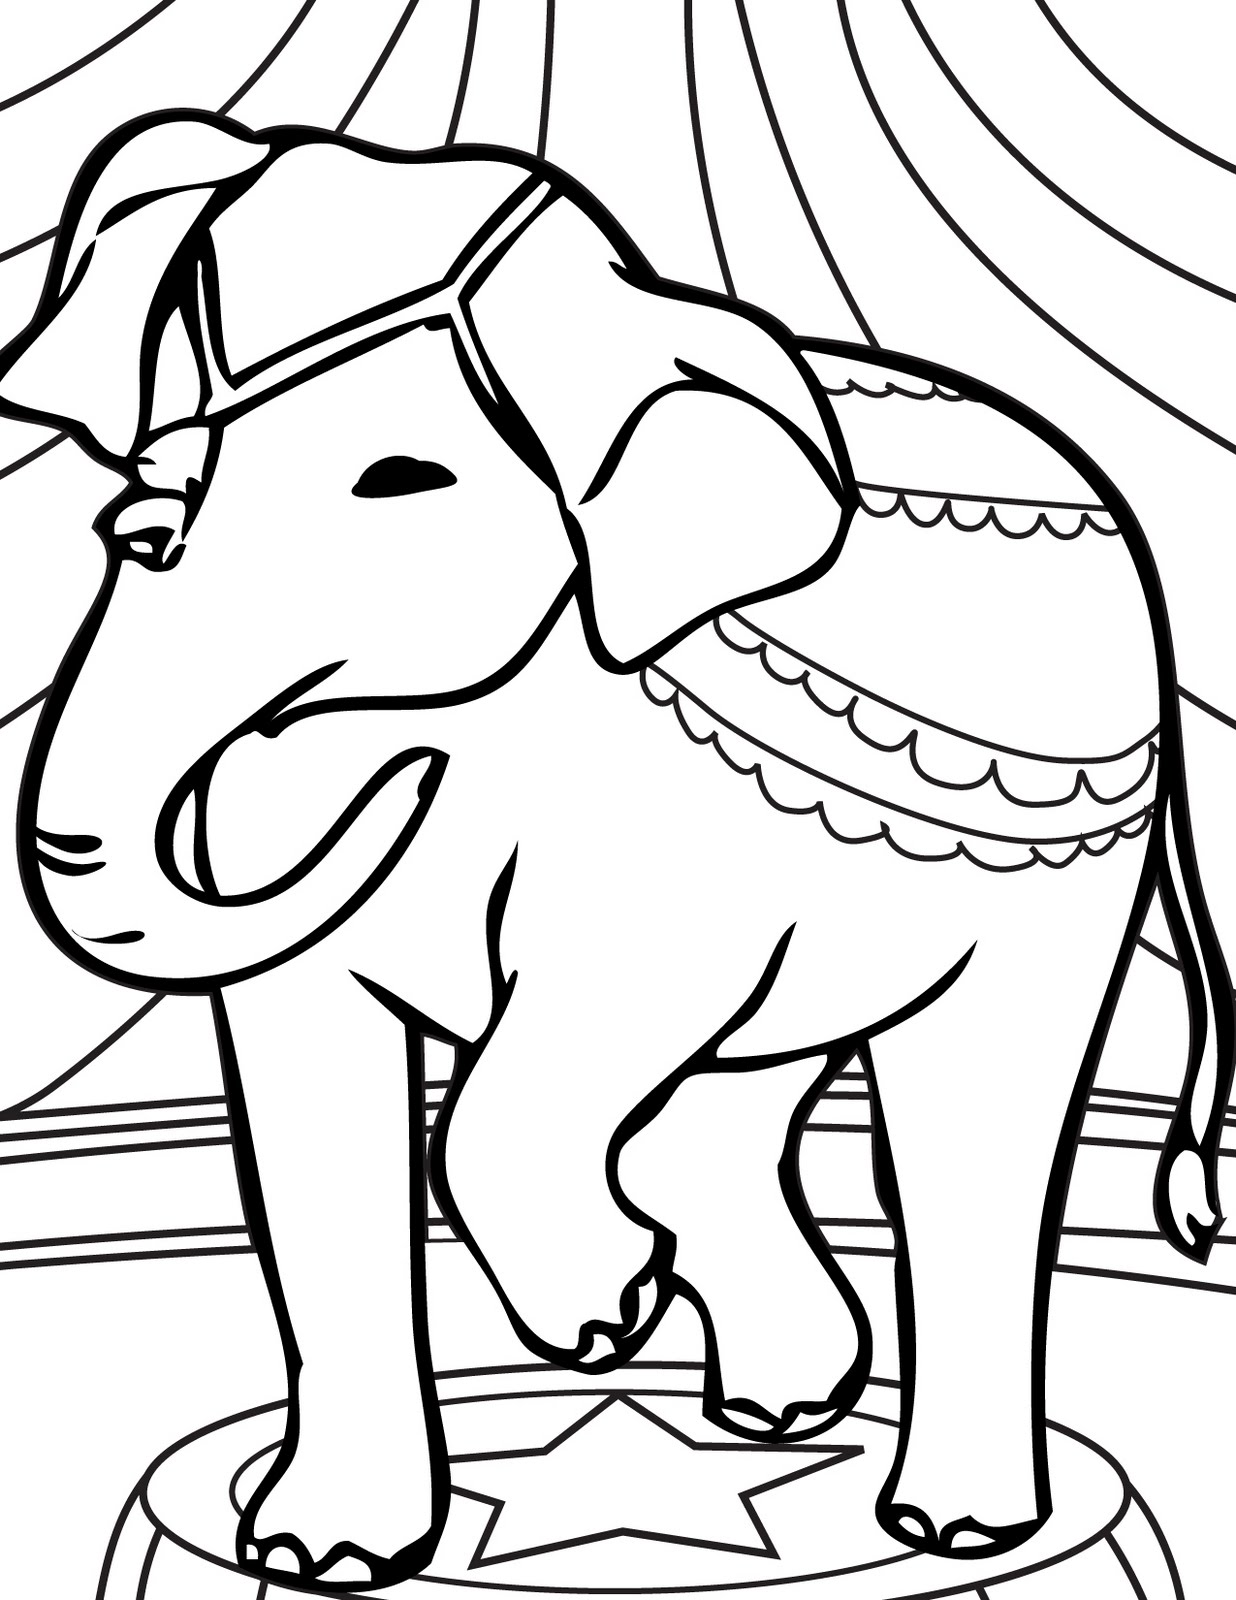 Circus Elephant Coloring pages Ideas To Kids - ClipArt Best ...